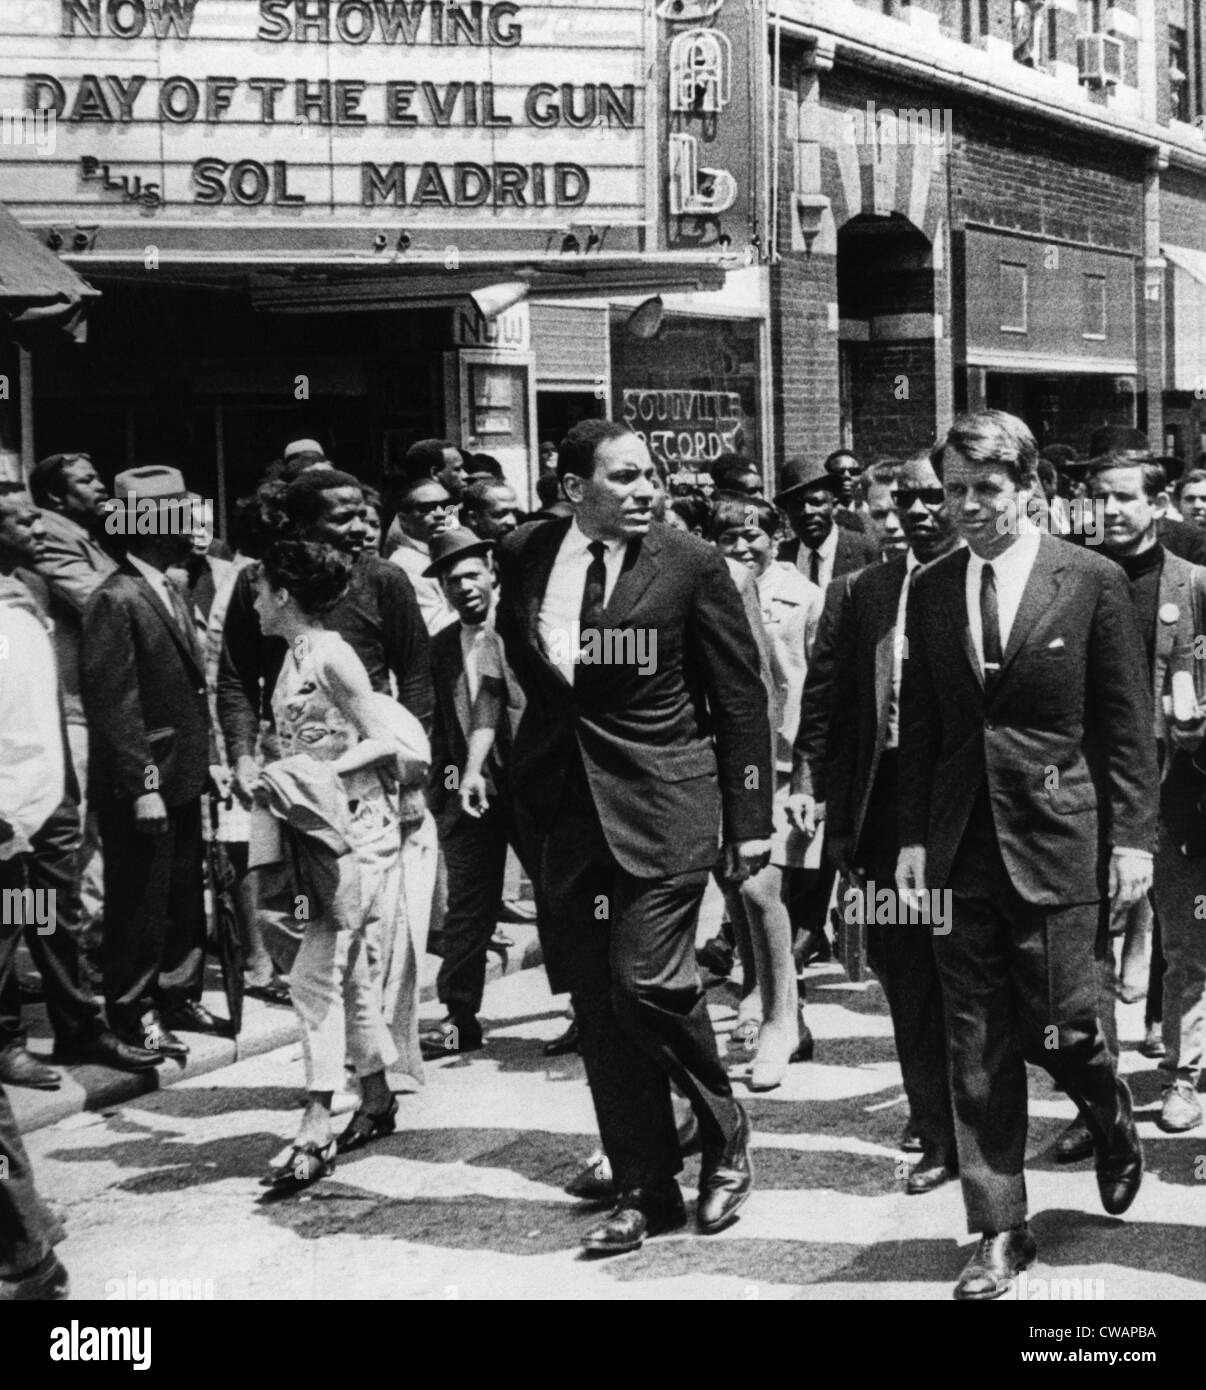 New York Senator Robert Kennedy (right), marching in the funeral procession honoring fallen civil rights leader Dr. Martin Stock Photo